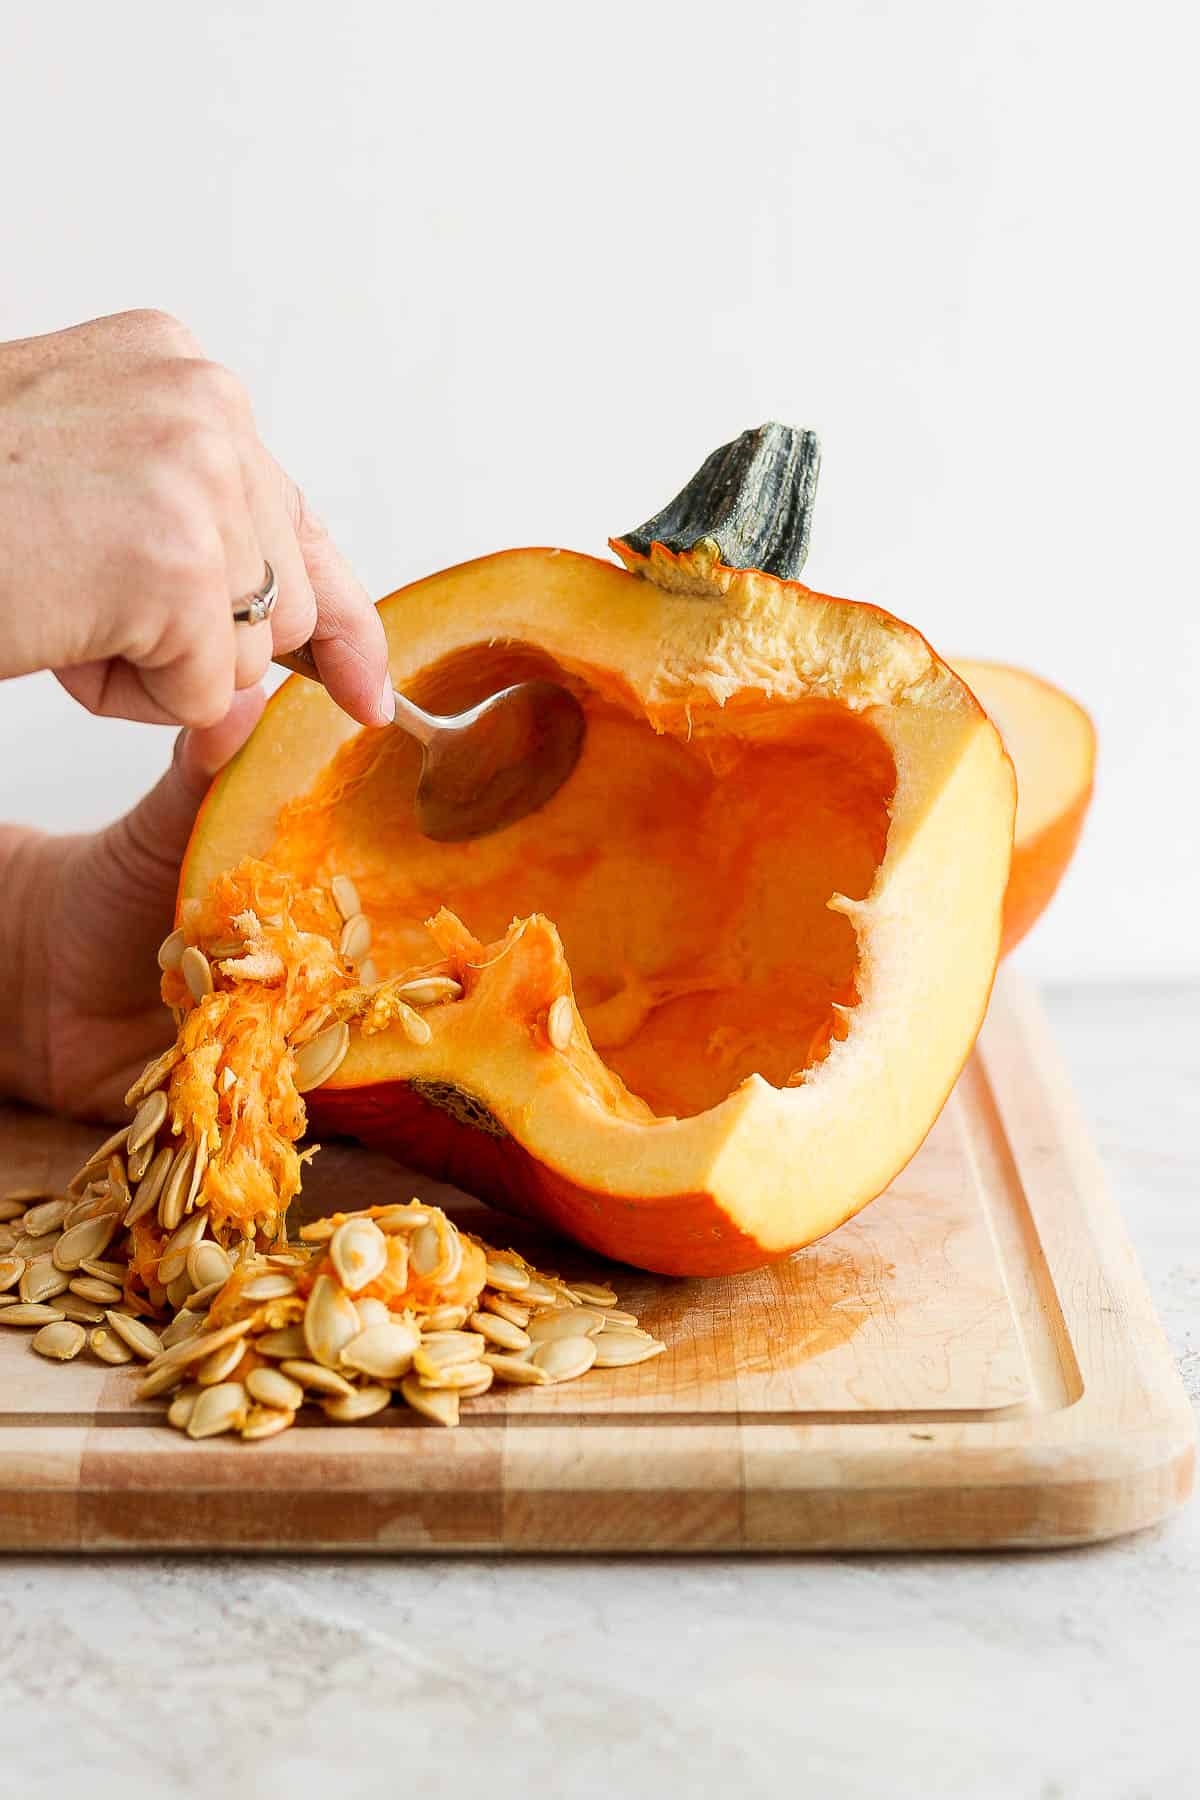 A spoon scooping the seeds and strings out of the pumpkin.